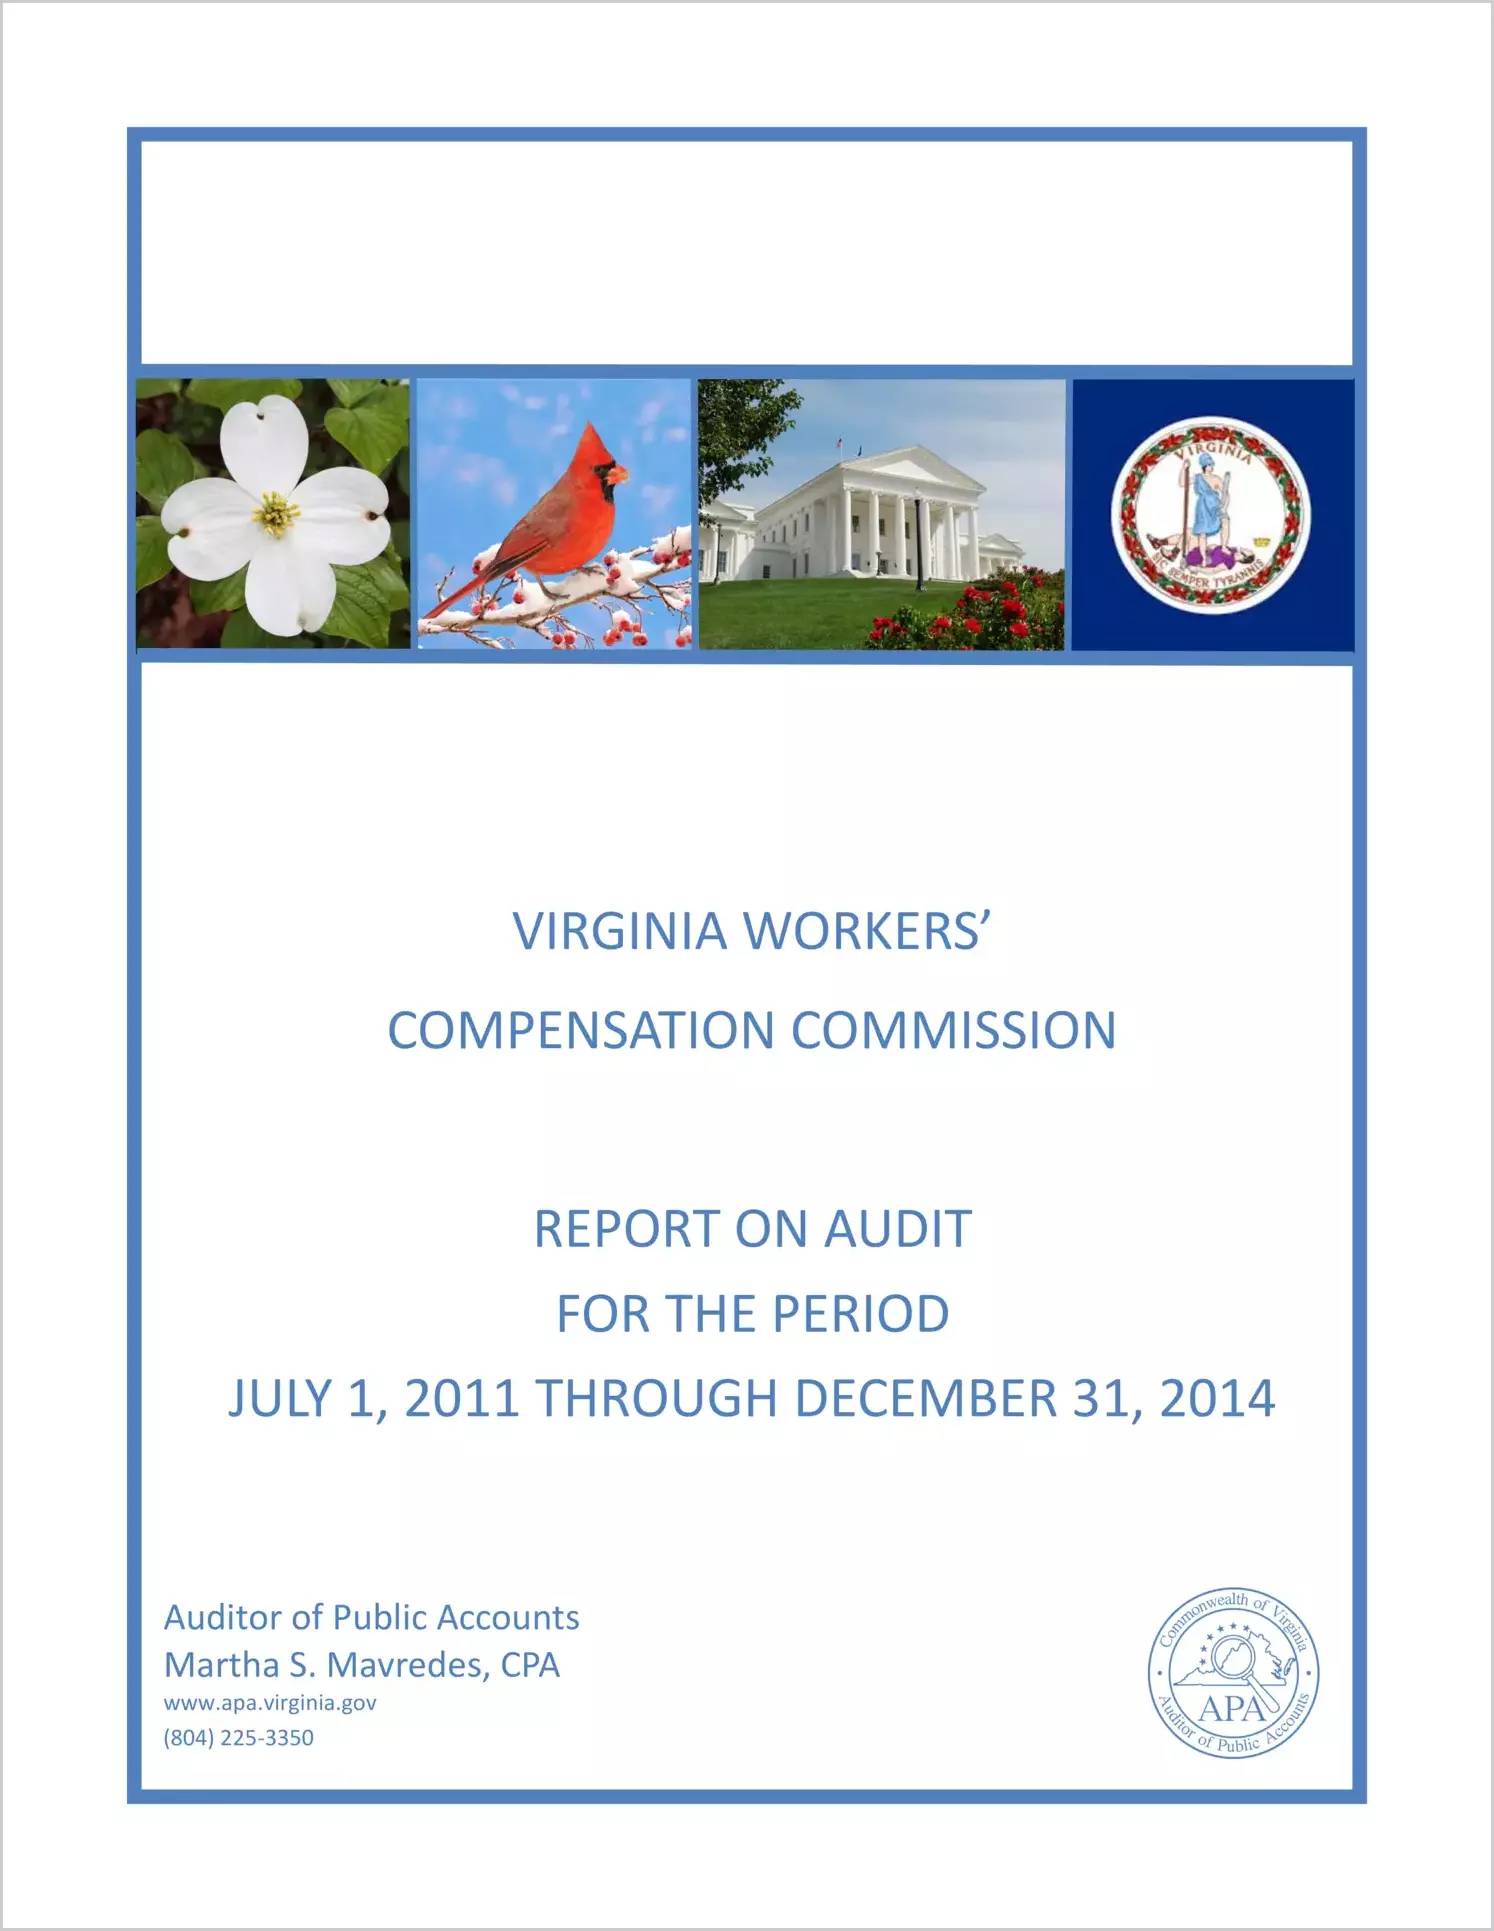 Virginia Worker's Compensation Commission for the period July 1, 2011 through December 31, 2014